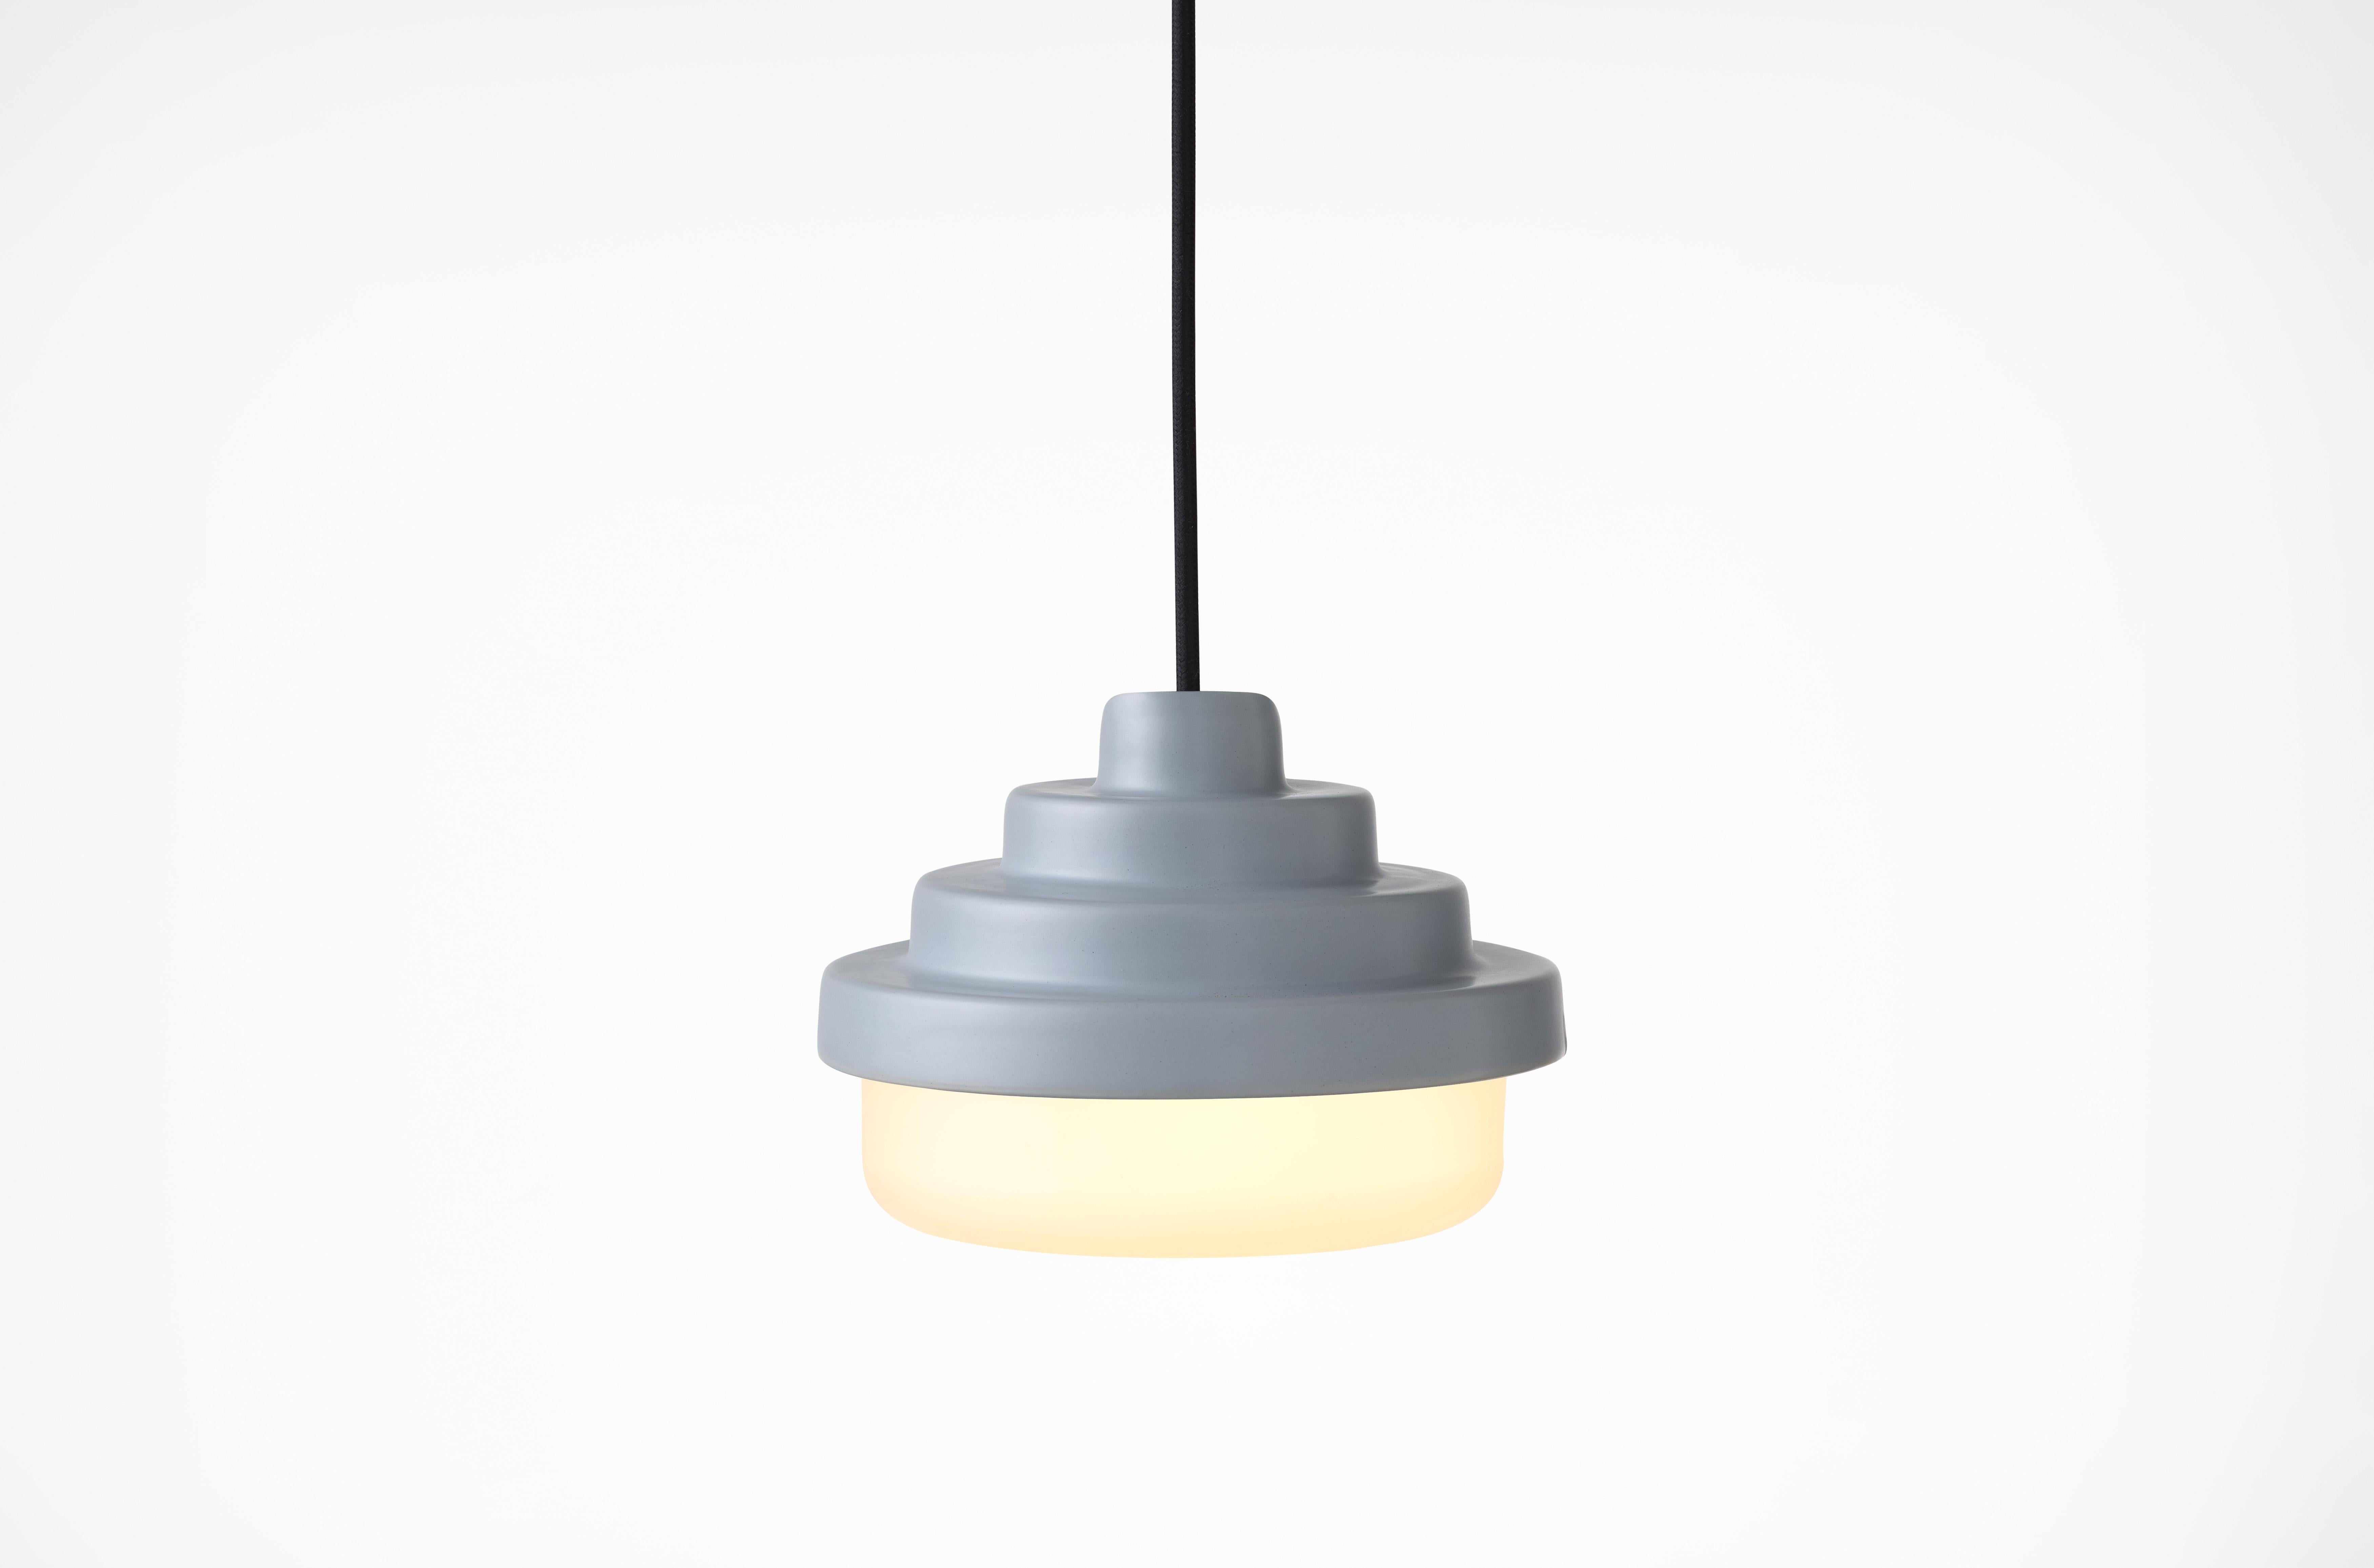 Blue and White Honey Pendant Light by Coco Flip
Dimensions: D 18 x W 18 x H 13 cm
Materials: Slip cast ceramic stoneware with blown glass. 
Weight: Approx. 2kg
Glass finishes: White
Ceramic finishes: Blue satin glaze. 

Standard fixtures included
1